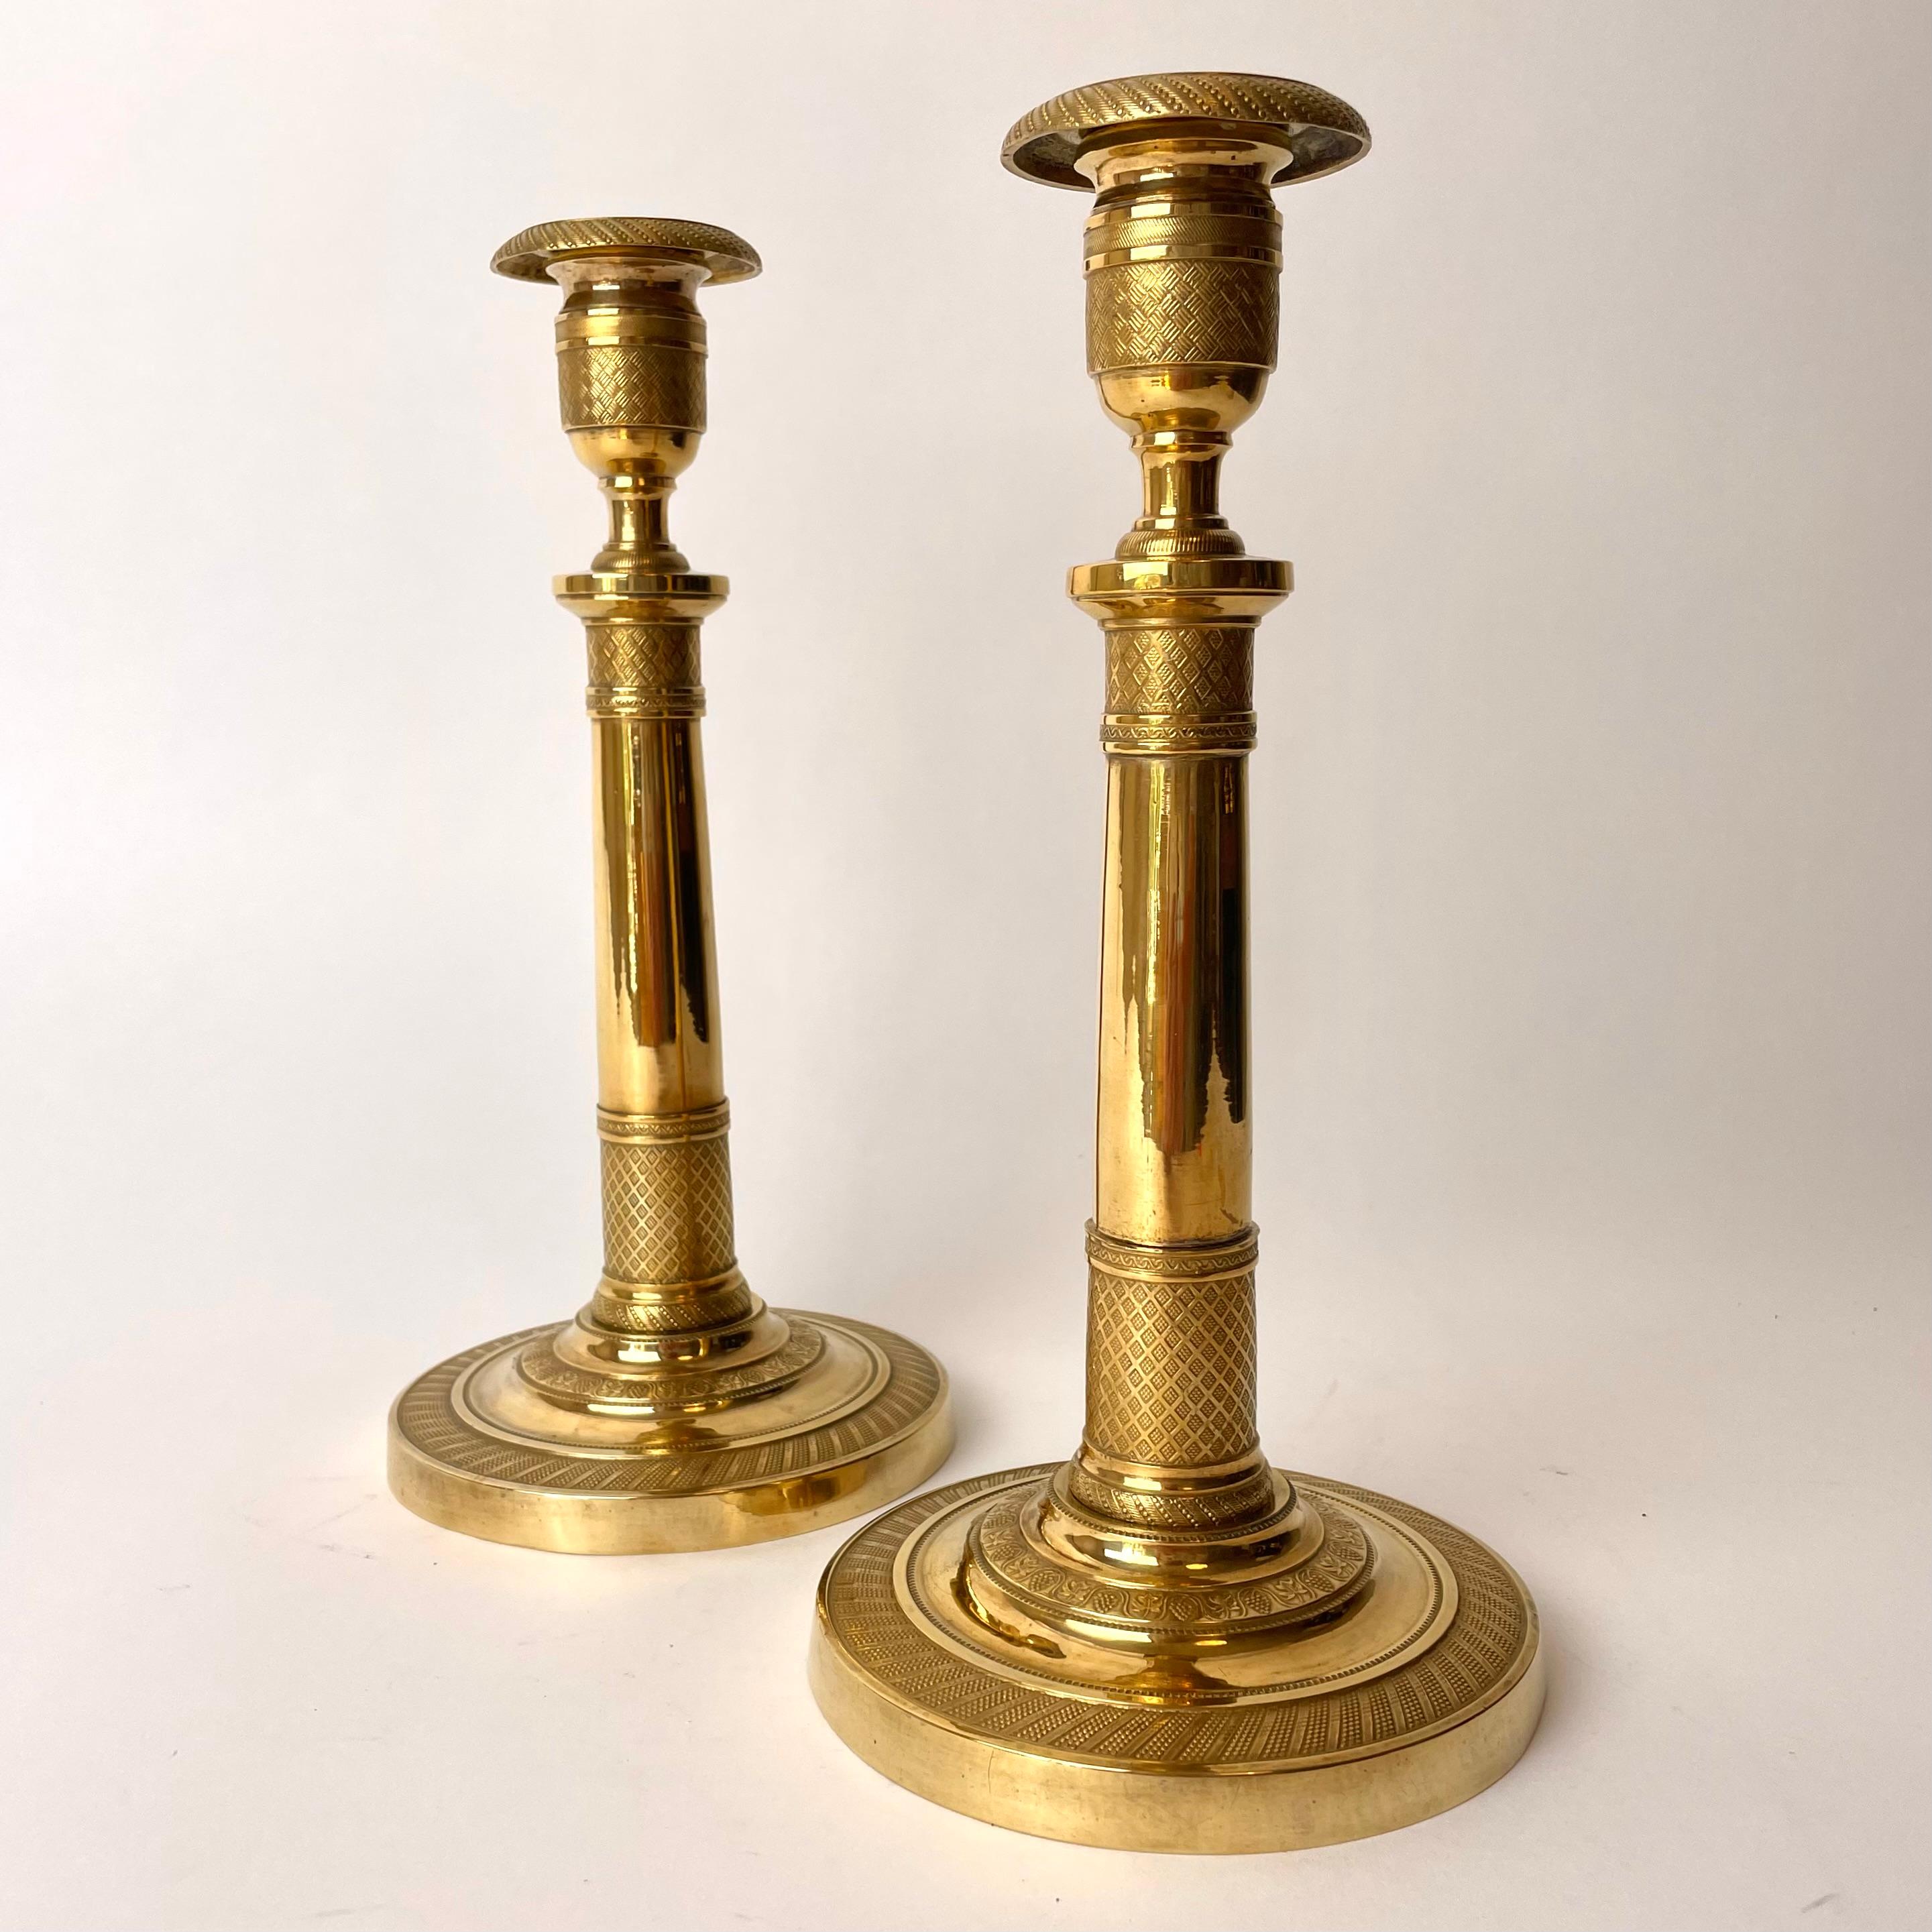 Pair of Empire Gilded Bronze Candlesticks.

Elegant and restrained, this pair of Candlesticks is treated with almost an architectural quality. Different kinds of checkered patterns in the gilded bronze give the column intricate detailing. The base